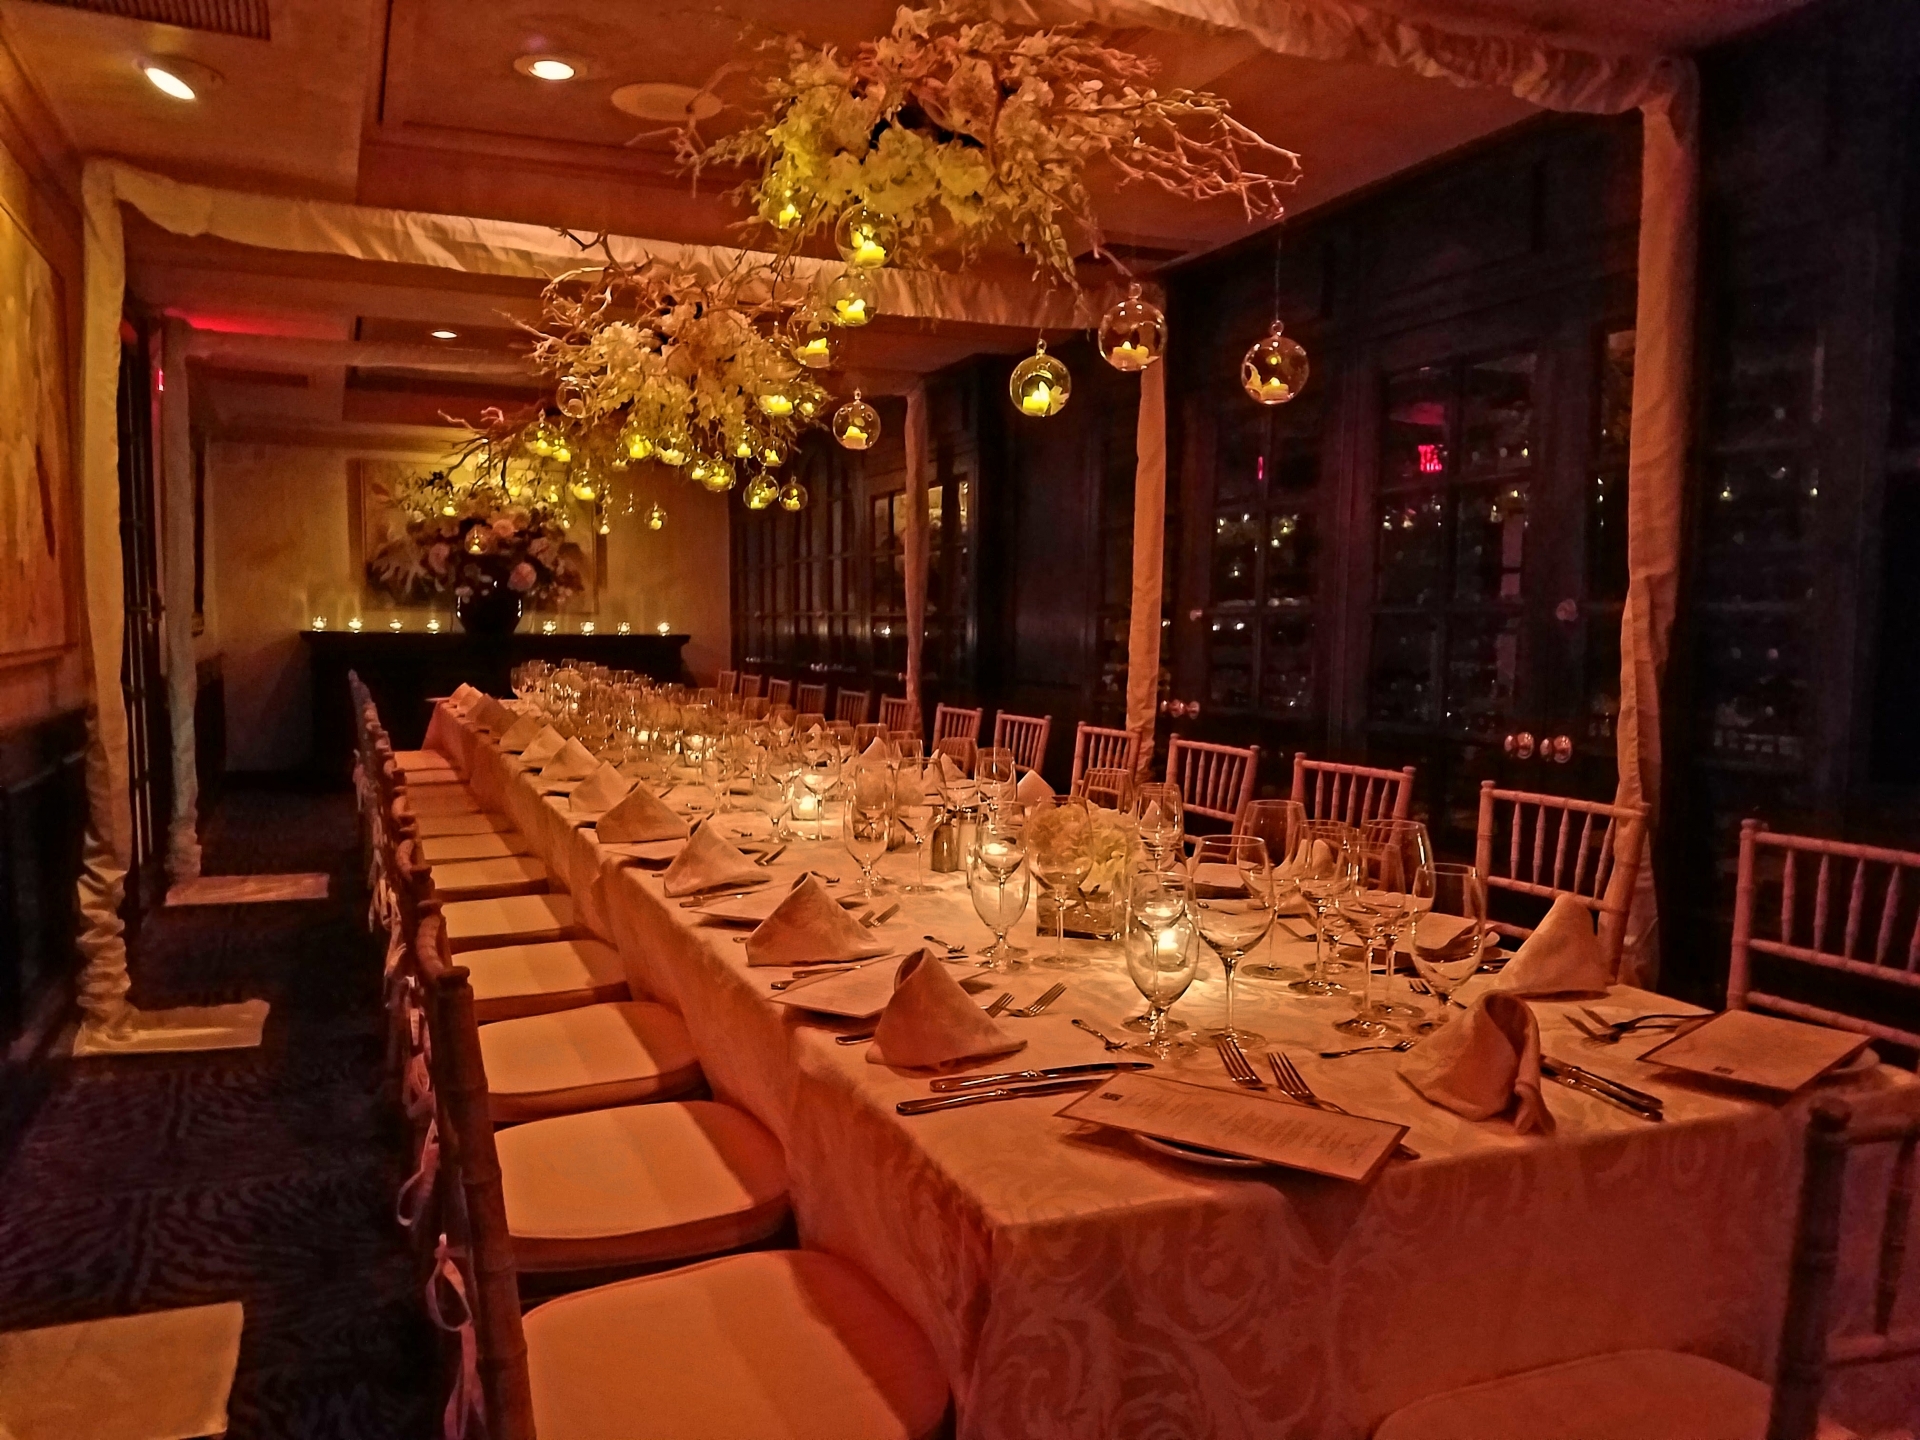 Piero's wine cellar room, an intimate private dining setting.